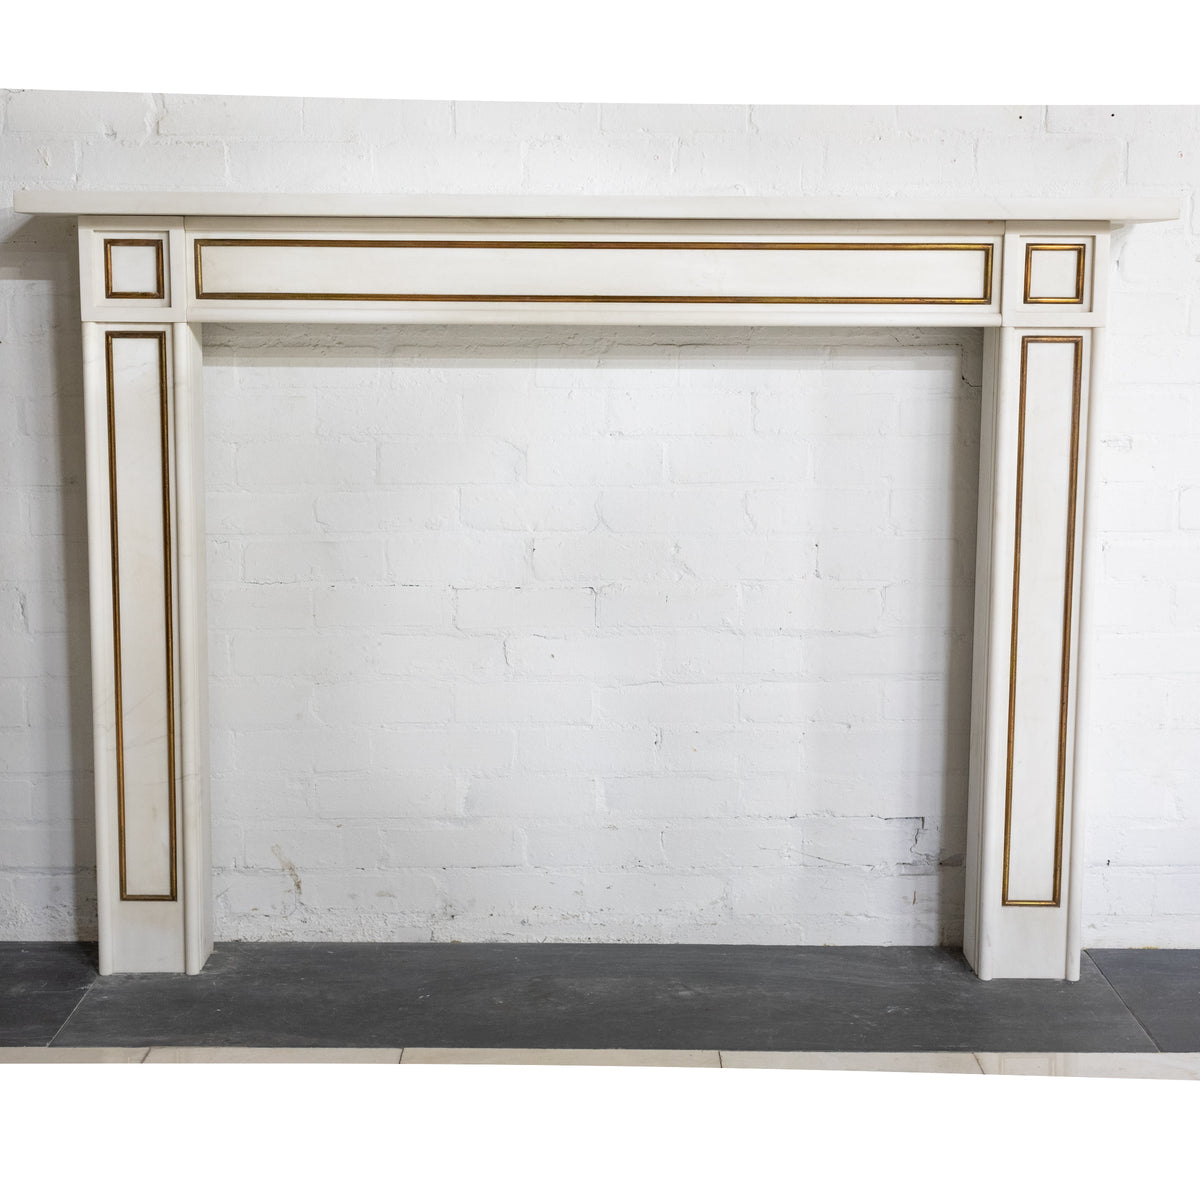 Reclaimed Statuary Marble Fireplace Surround with Brass Detail | The Architectural Forum